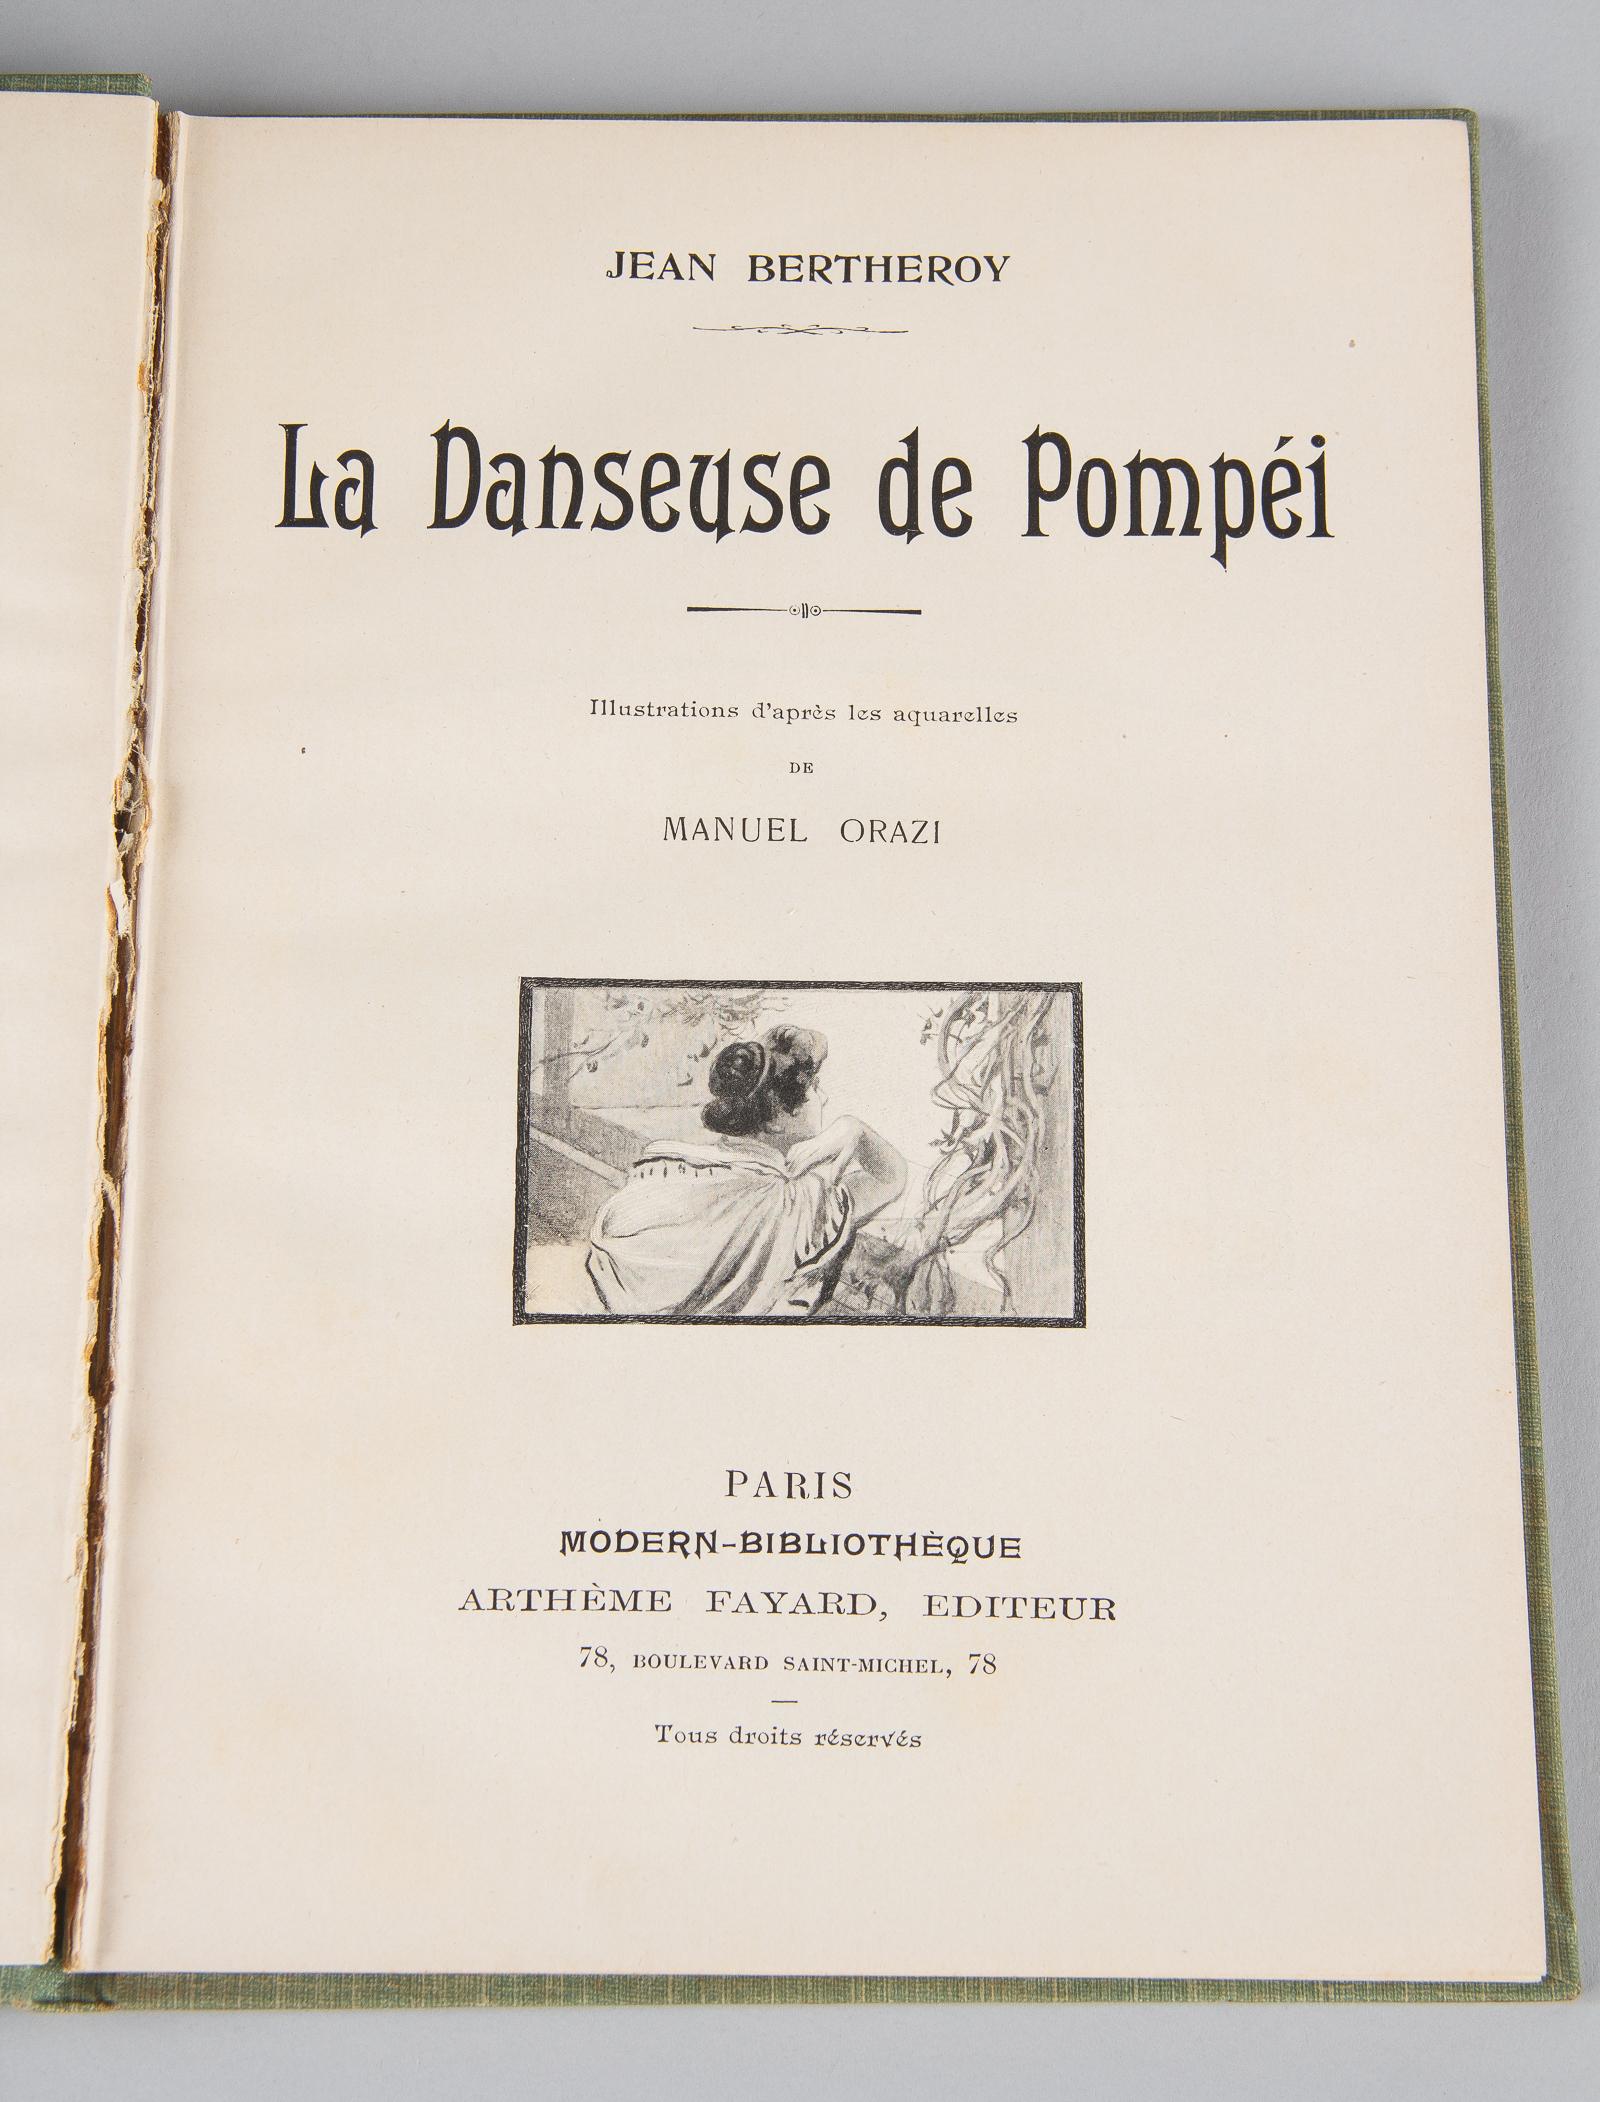 20th Century French Books, Short Novels from Paris Modern-Bibliotheque, Early 1900s For Sale